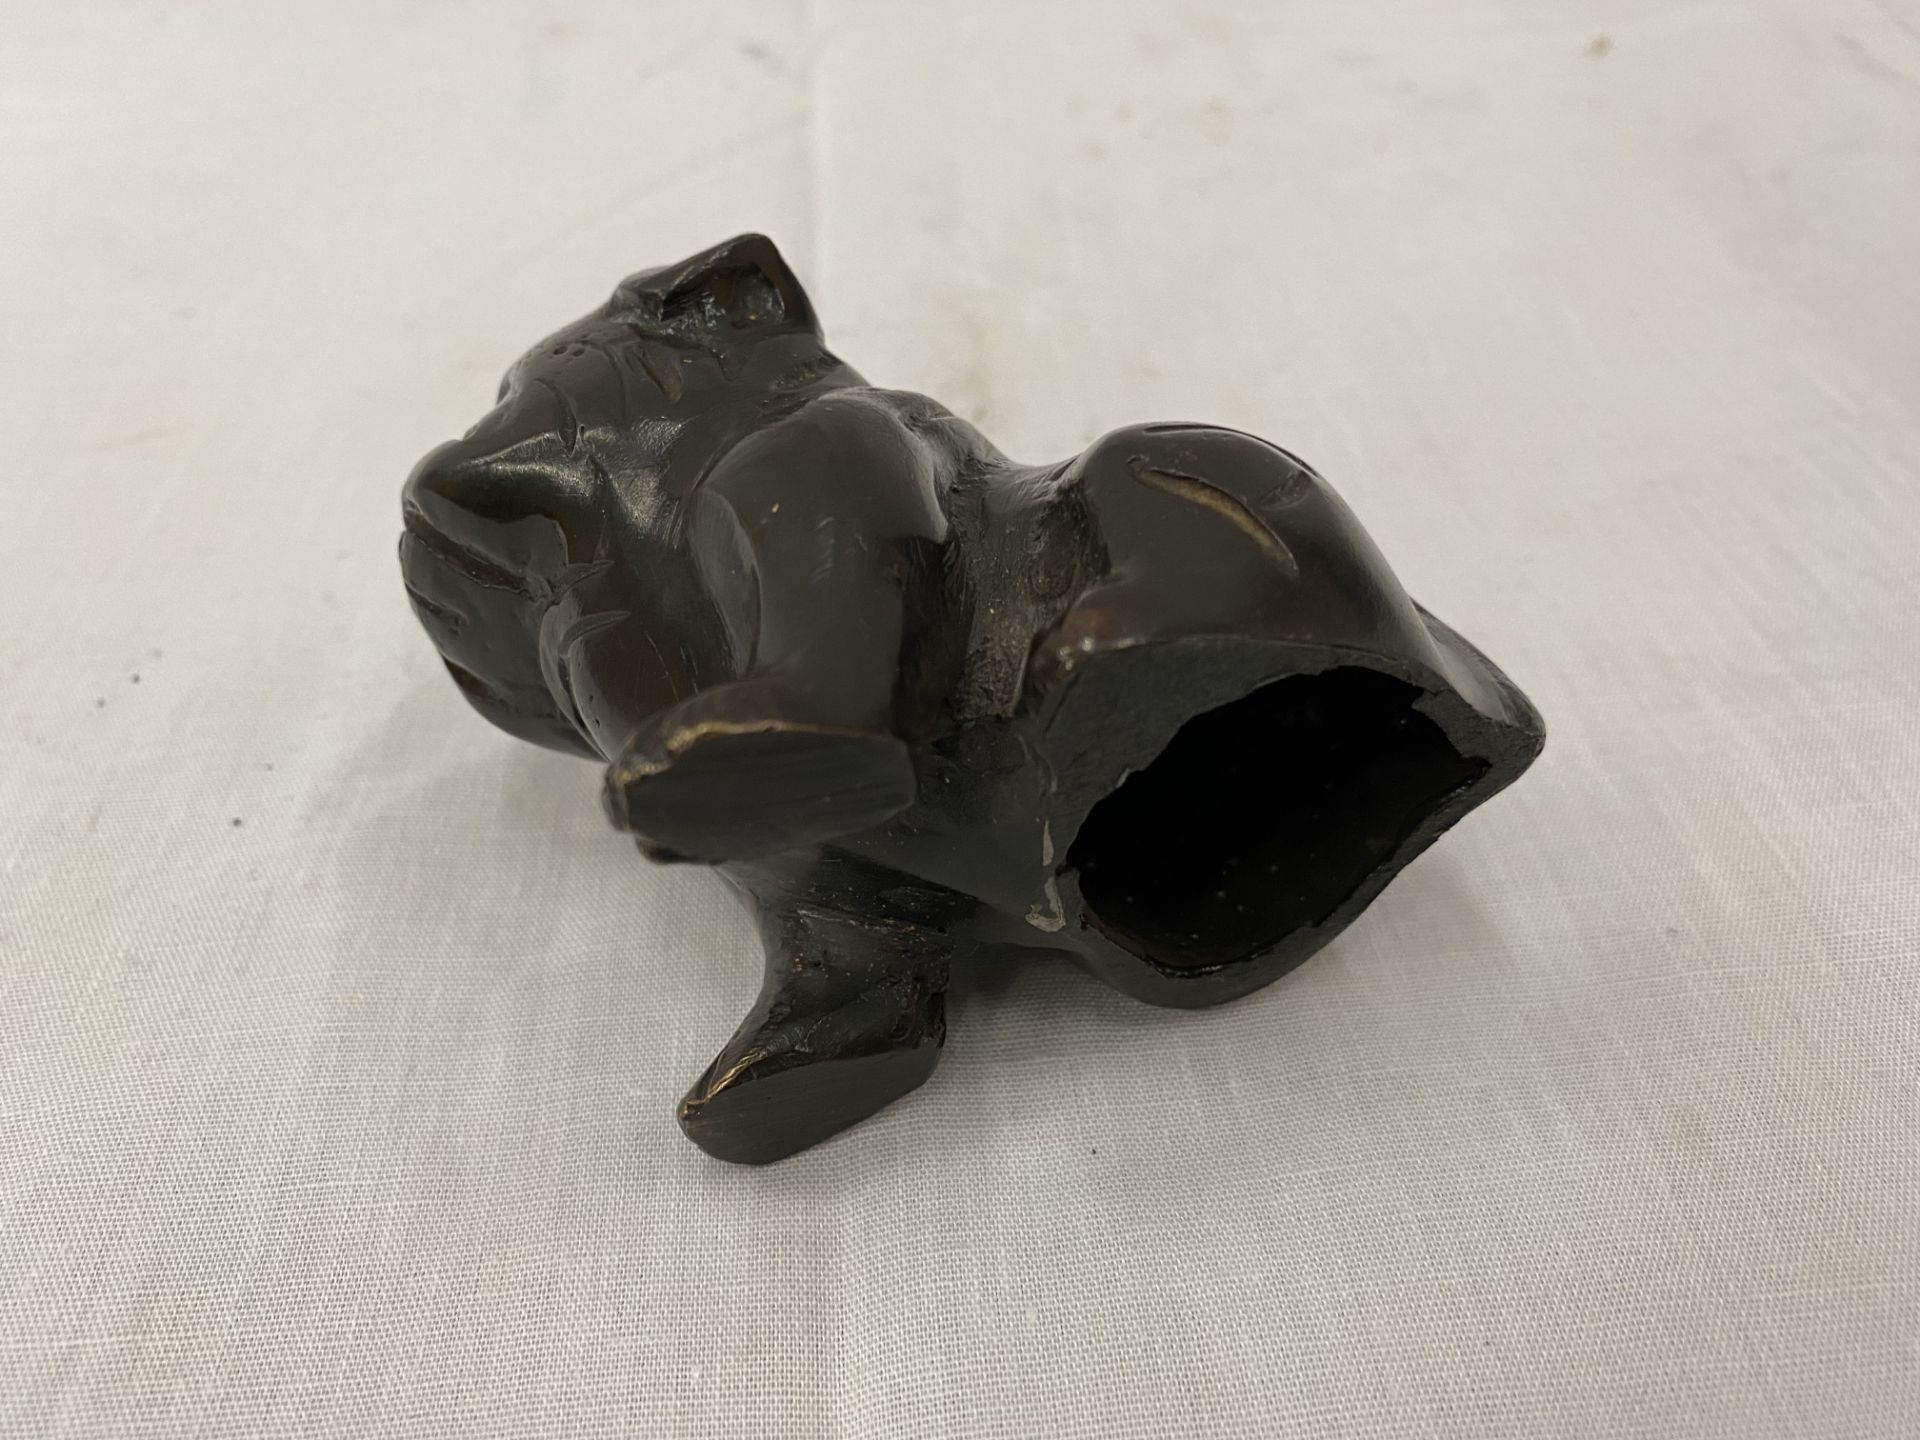 A PAIR OF BRONZE BULLDOGS, ONE SITTING AND ONE LAYING DOWN, HEIGHT 7CM AND 4CM - Image 21 of 22